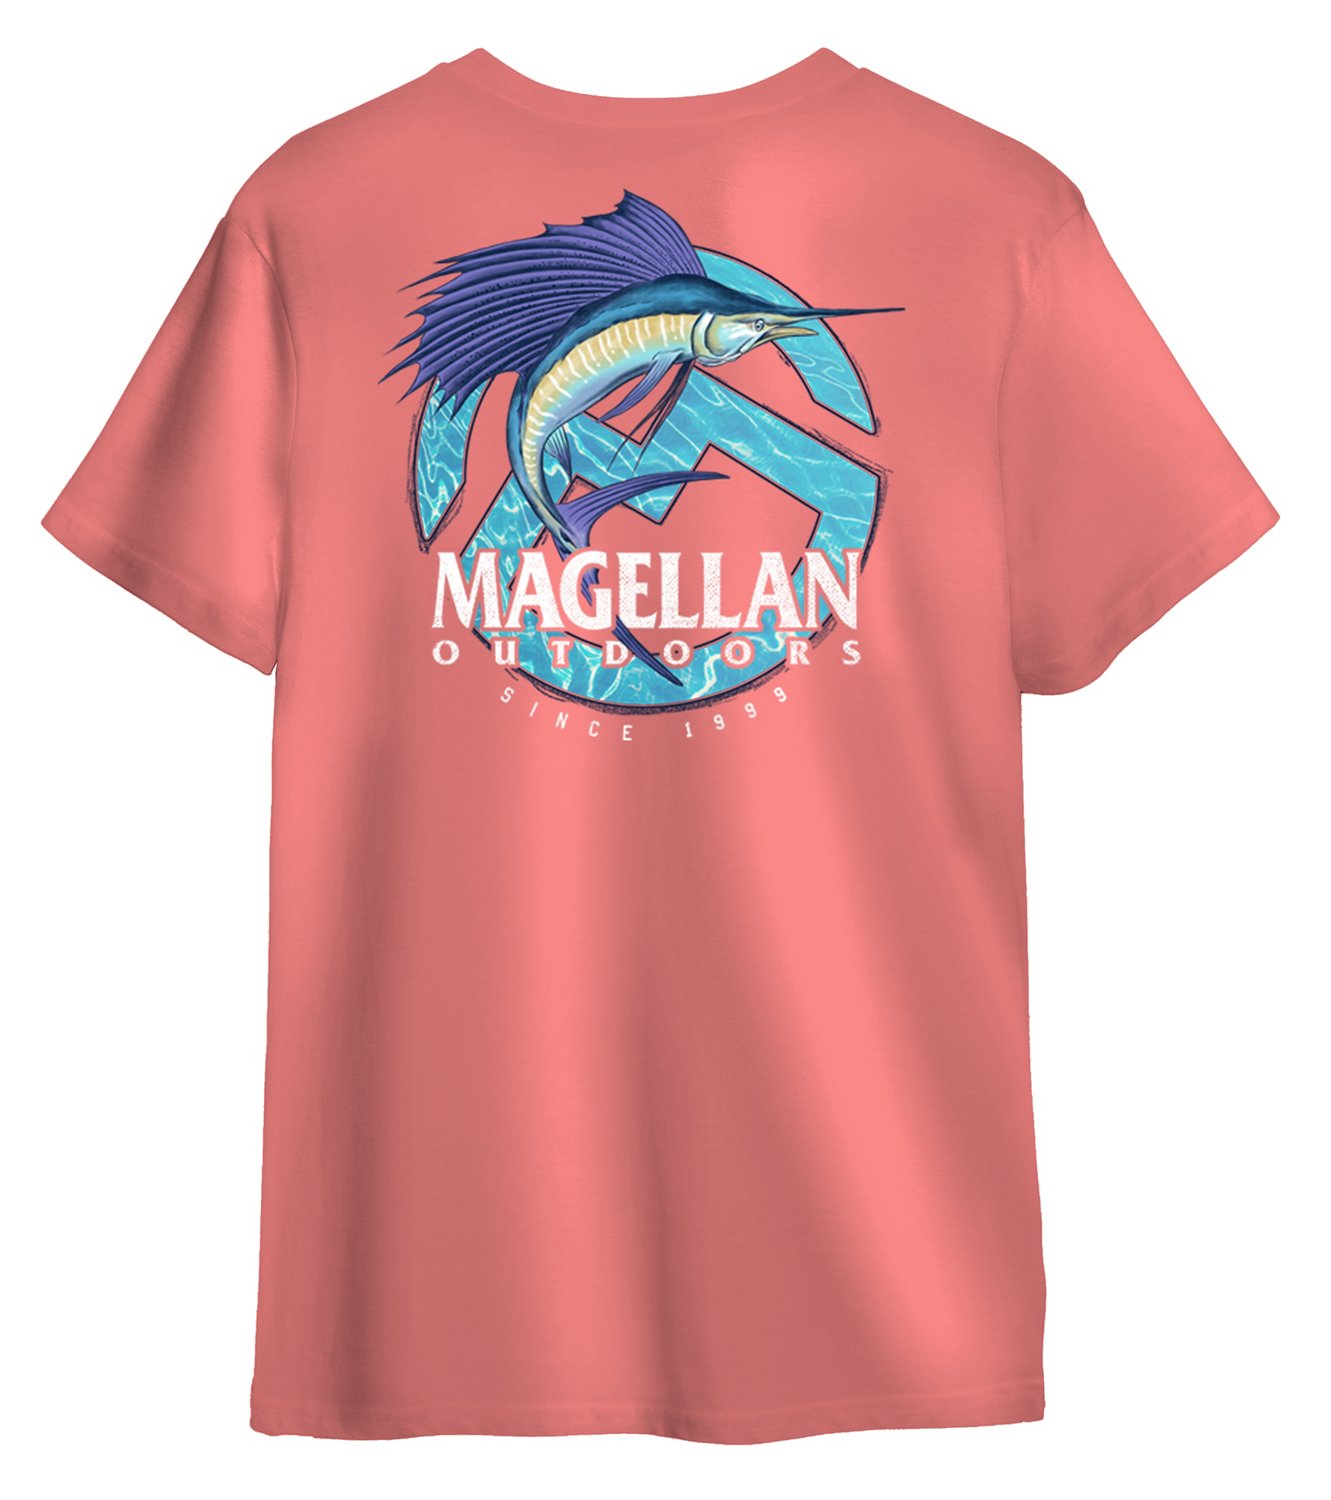 Magellan Boys Tops, Shirts & T-Shirts for Boys for sale